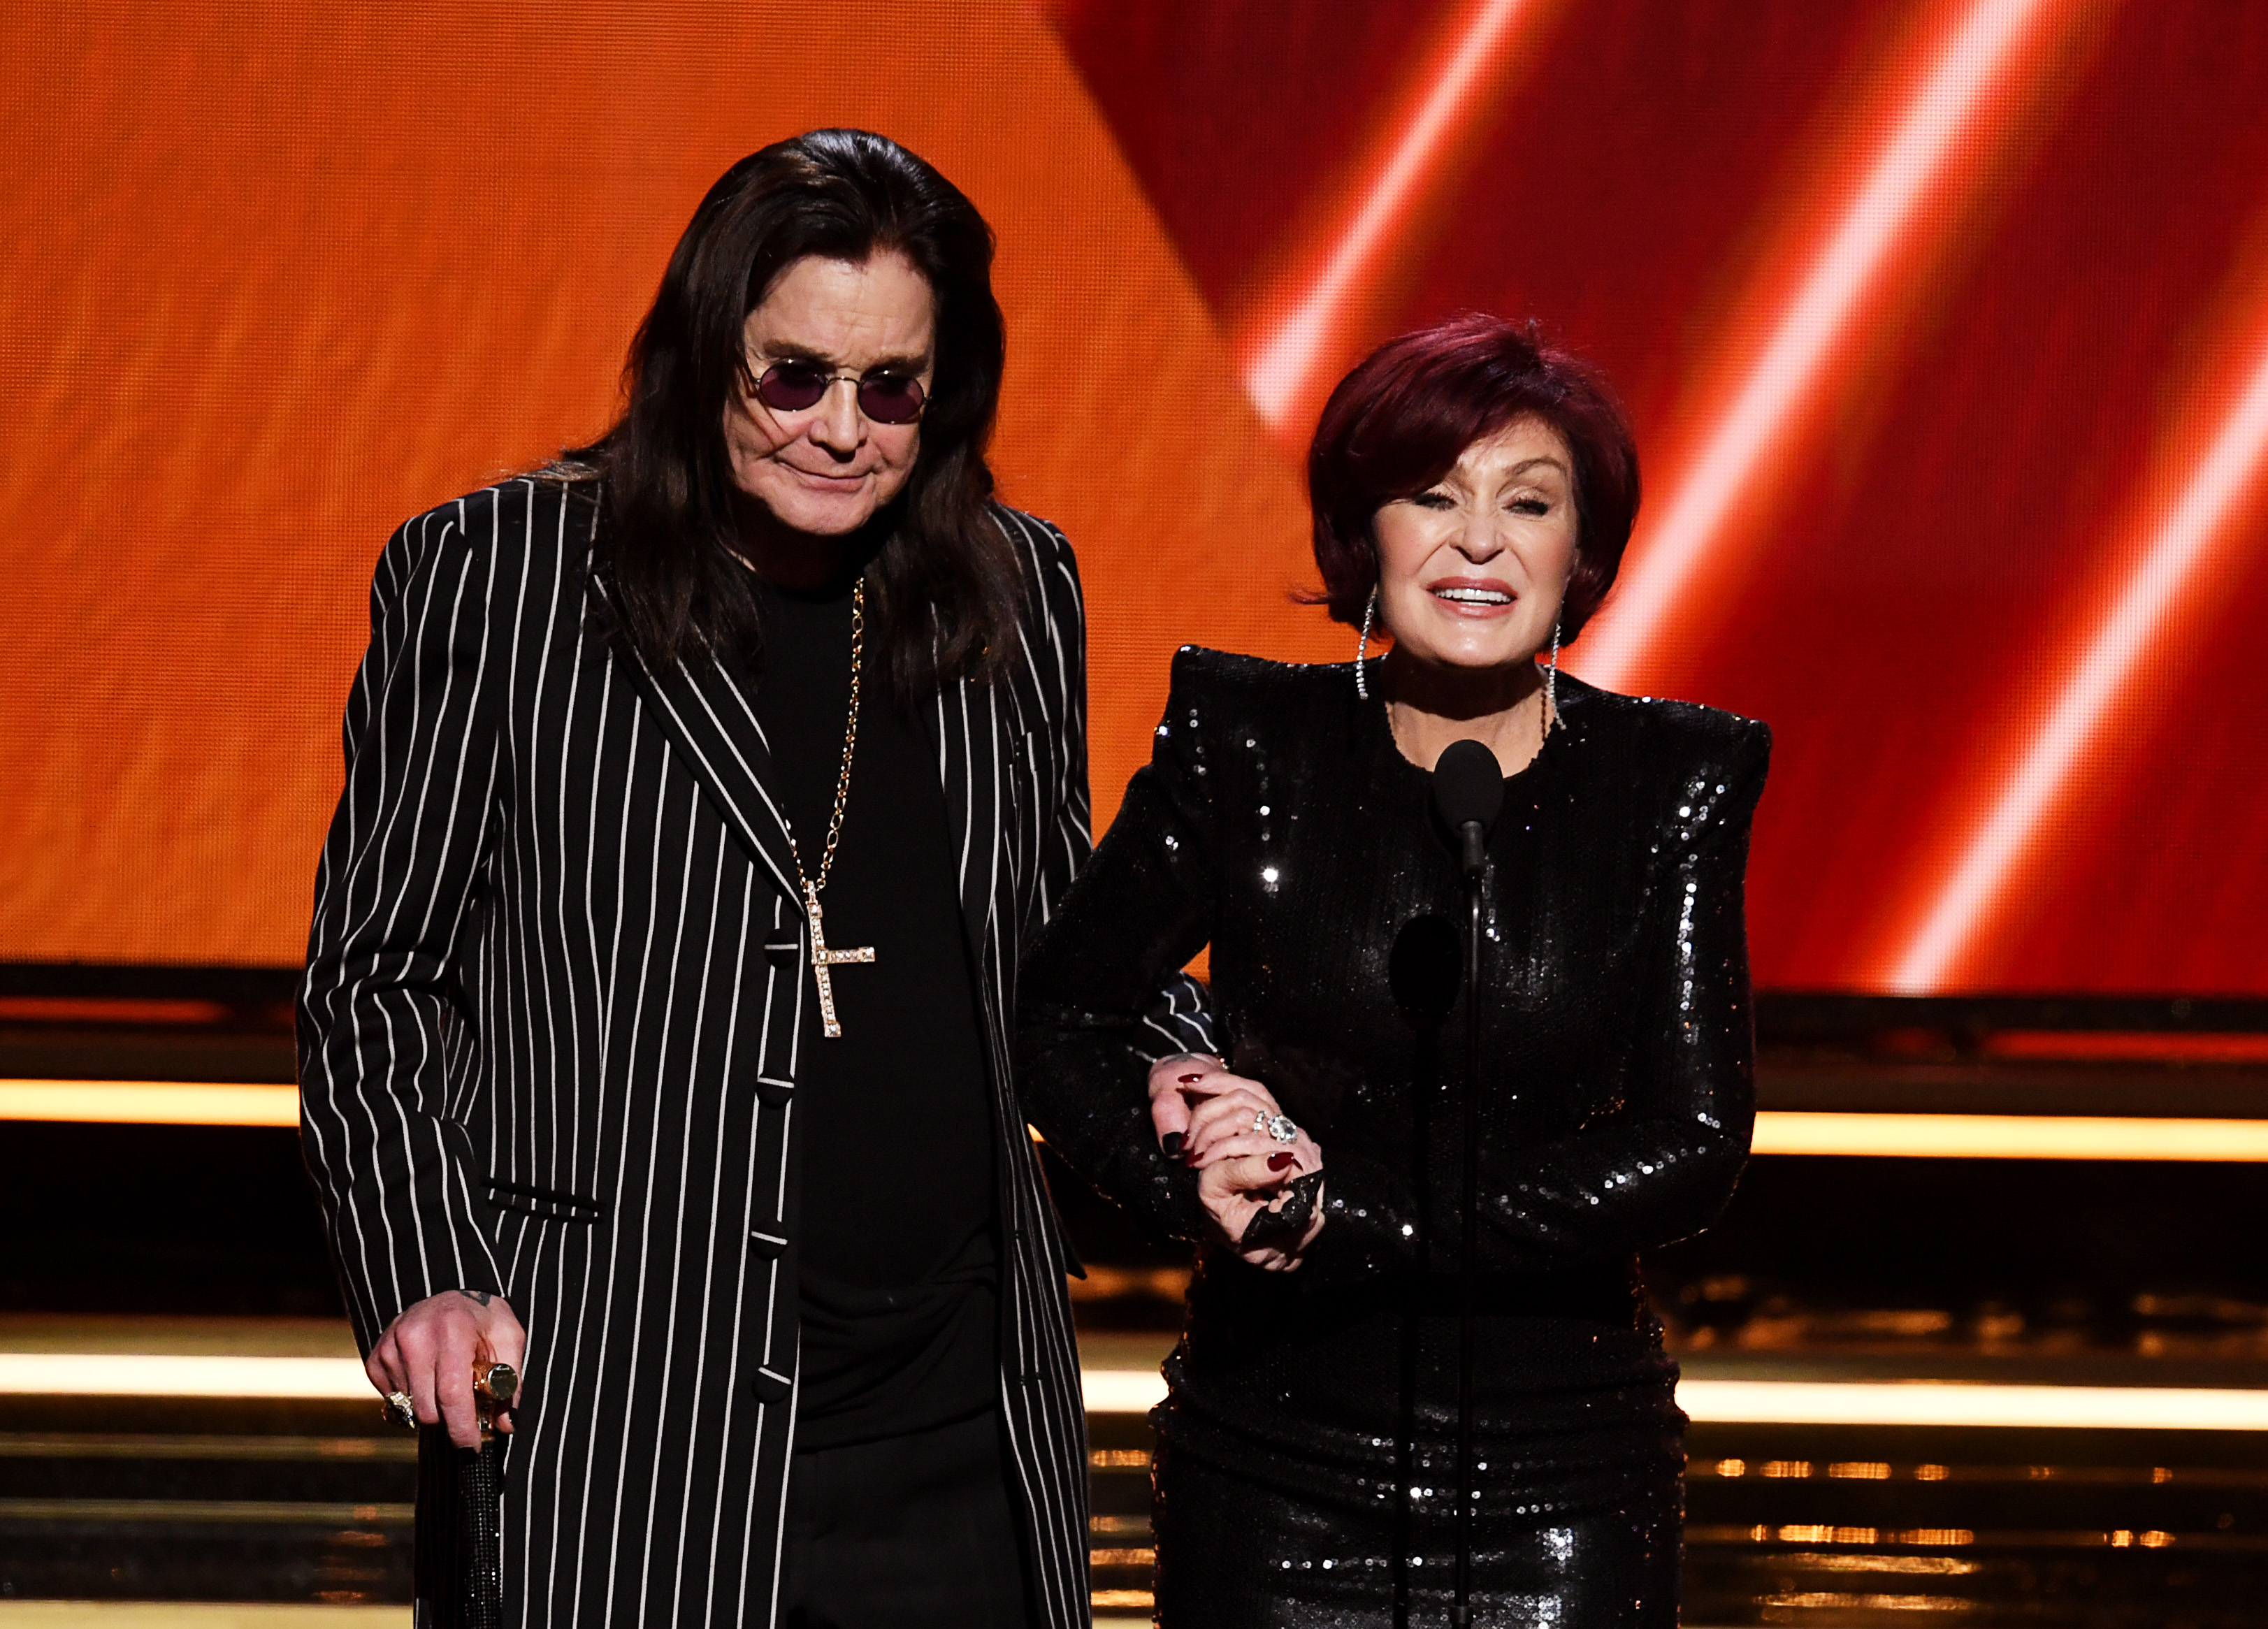 Ozzy Osbourne and Sharon Osbourne speak onstage during the 62nd Annual GRAMMY Awards at STAPLES Center on January 26, 2020 in Los Angeles, California. | Source: Getty Images